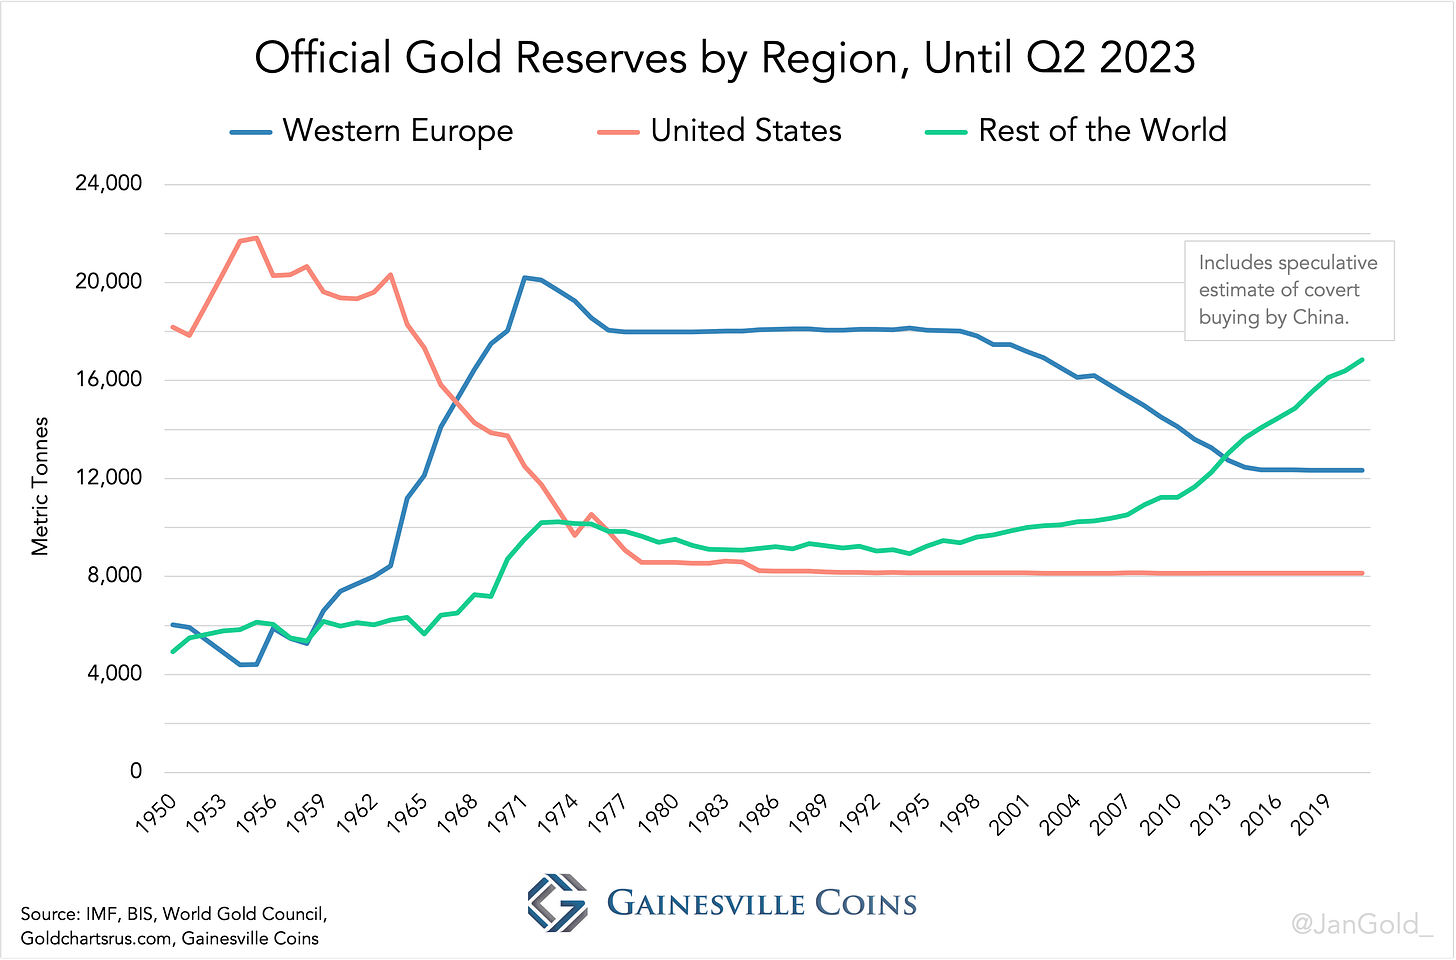 Official Gold Reserves by Region, Until Q2 2023